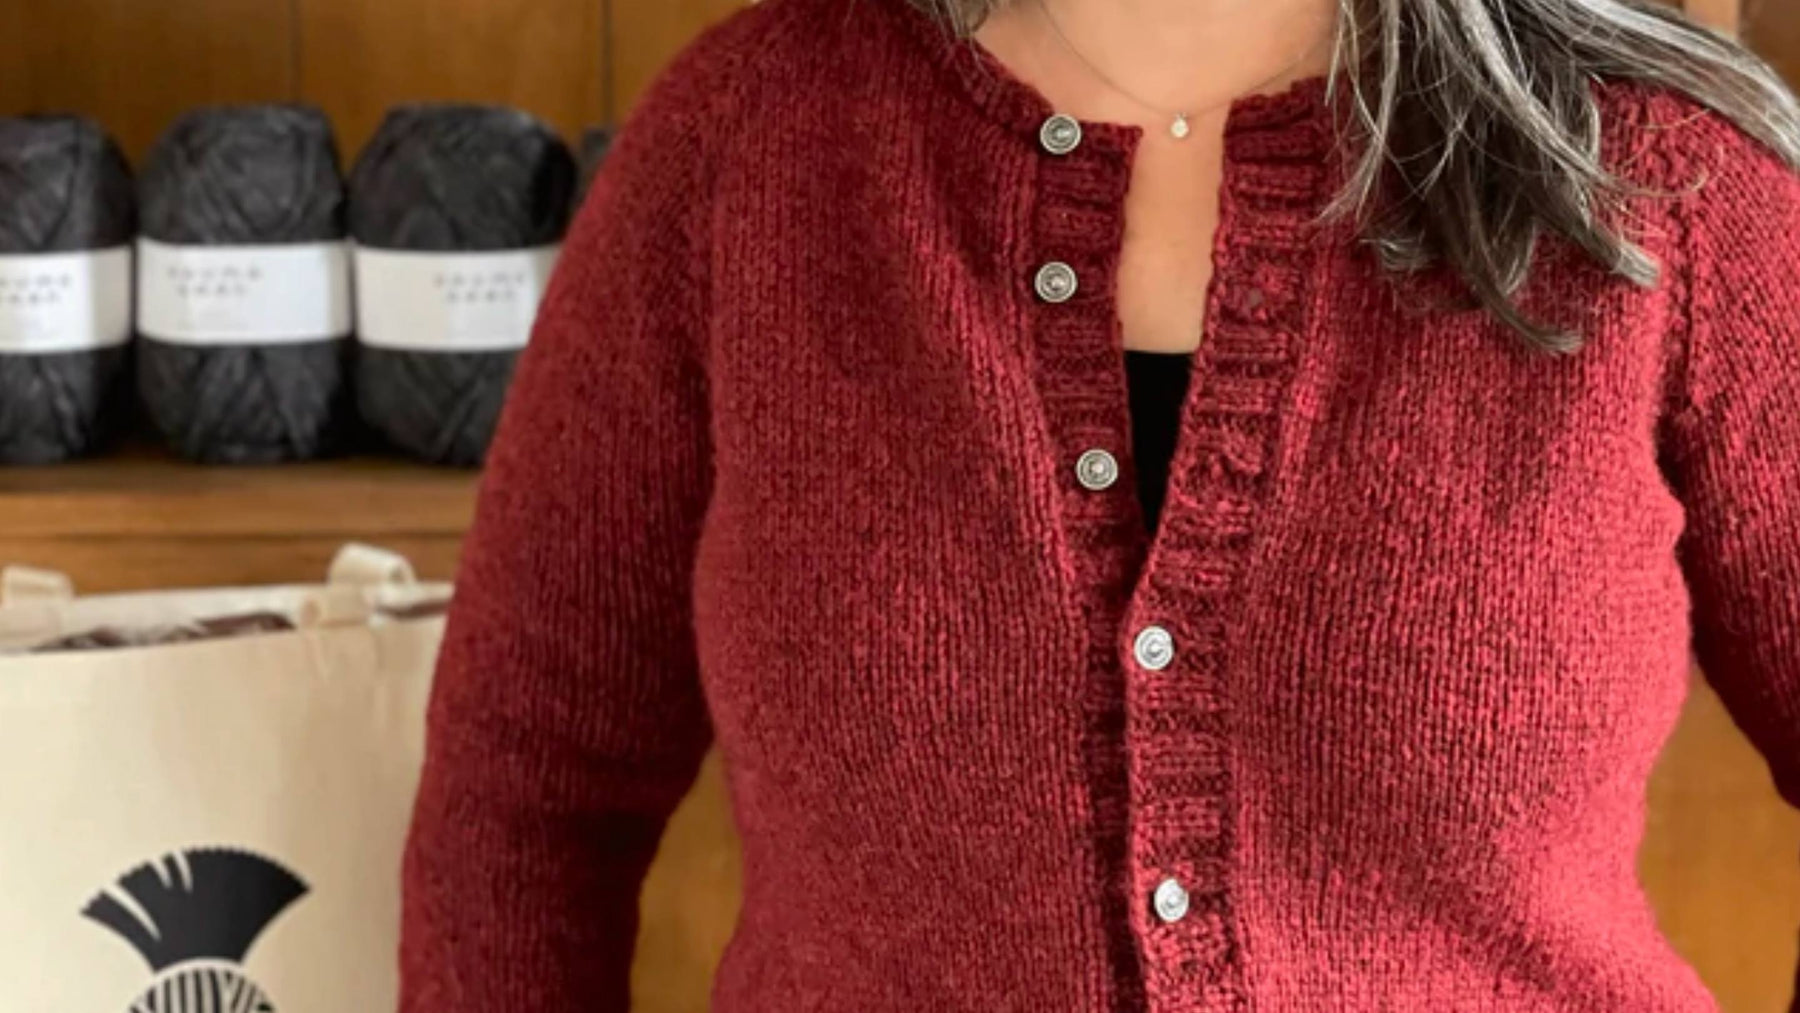 Shoulder and Bust view of woman wearing The Woolly Thistle Victory Cardigan. Sweater is a deep red color with white buttons. Woman is standing in front of a shelf with a TWT Tote bag and Rauma Vams yarn balls. 